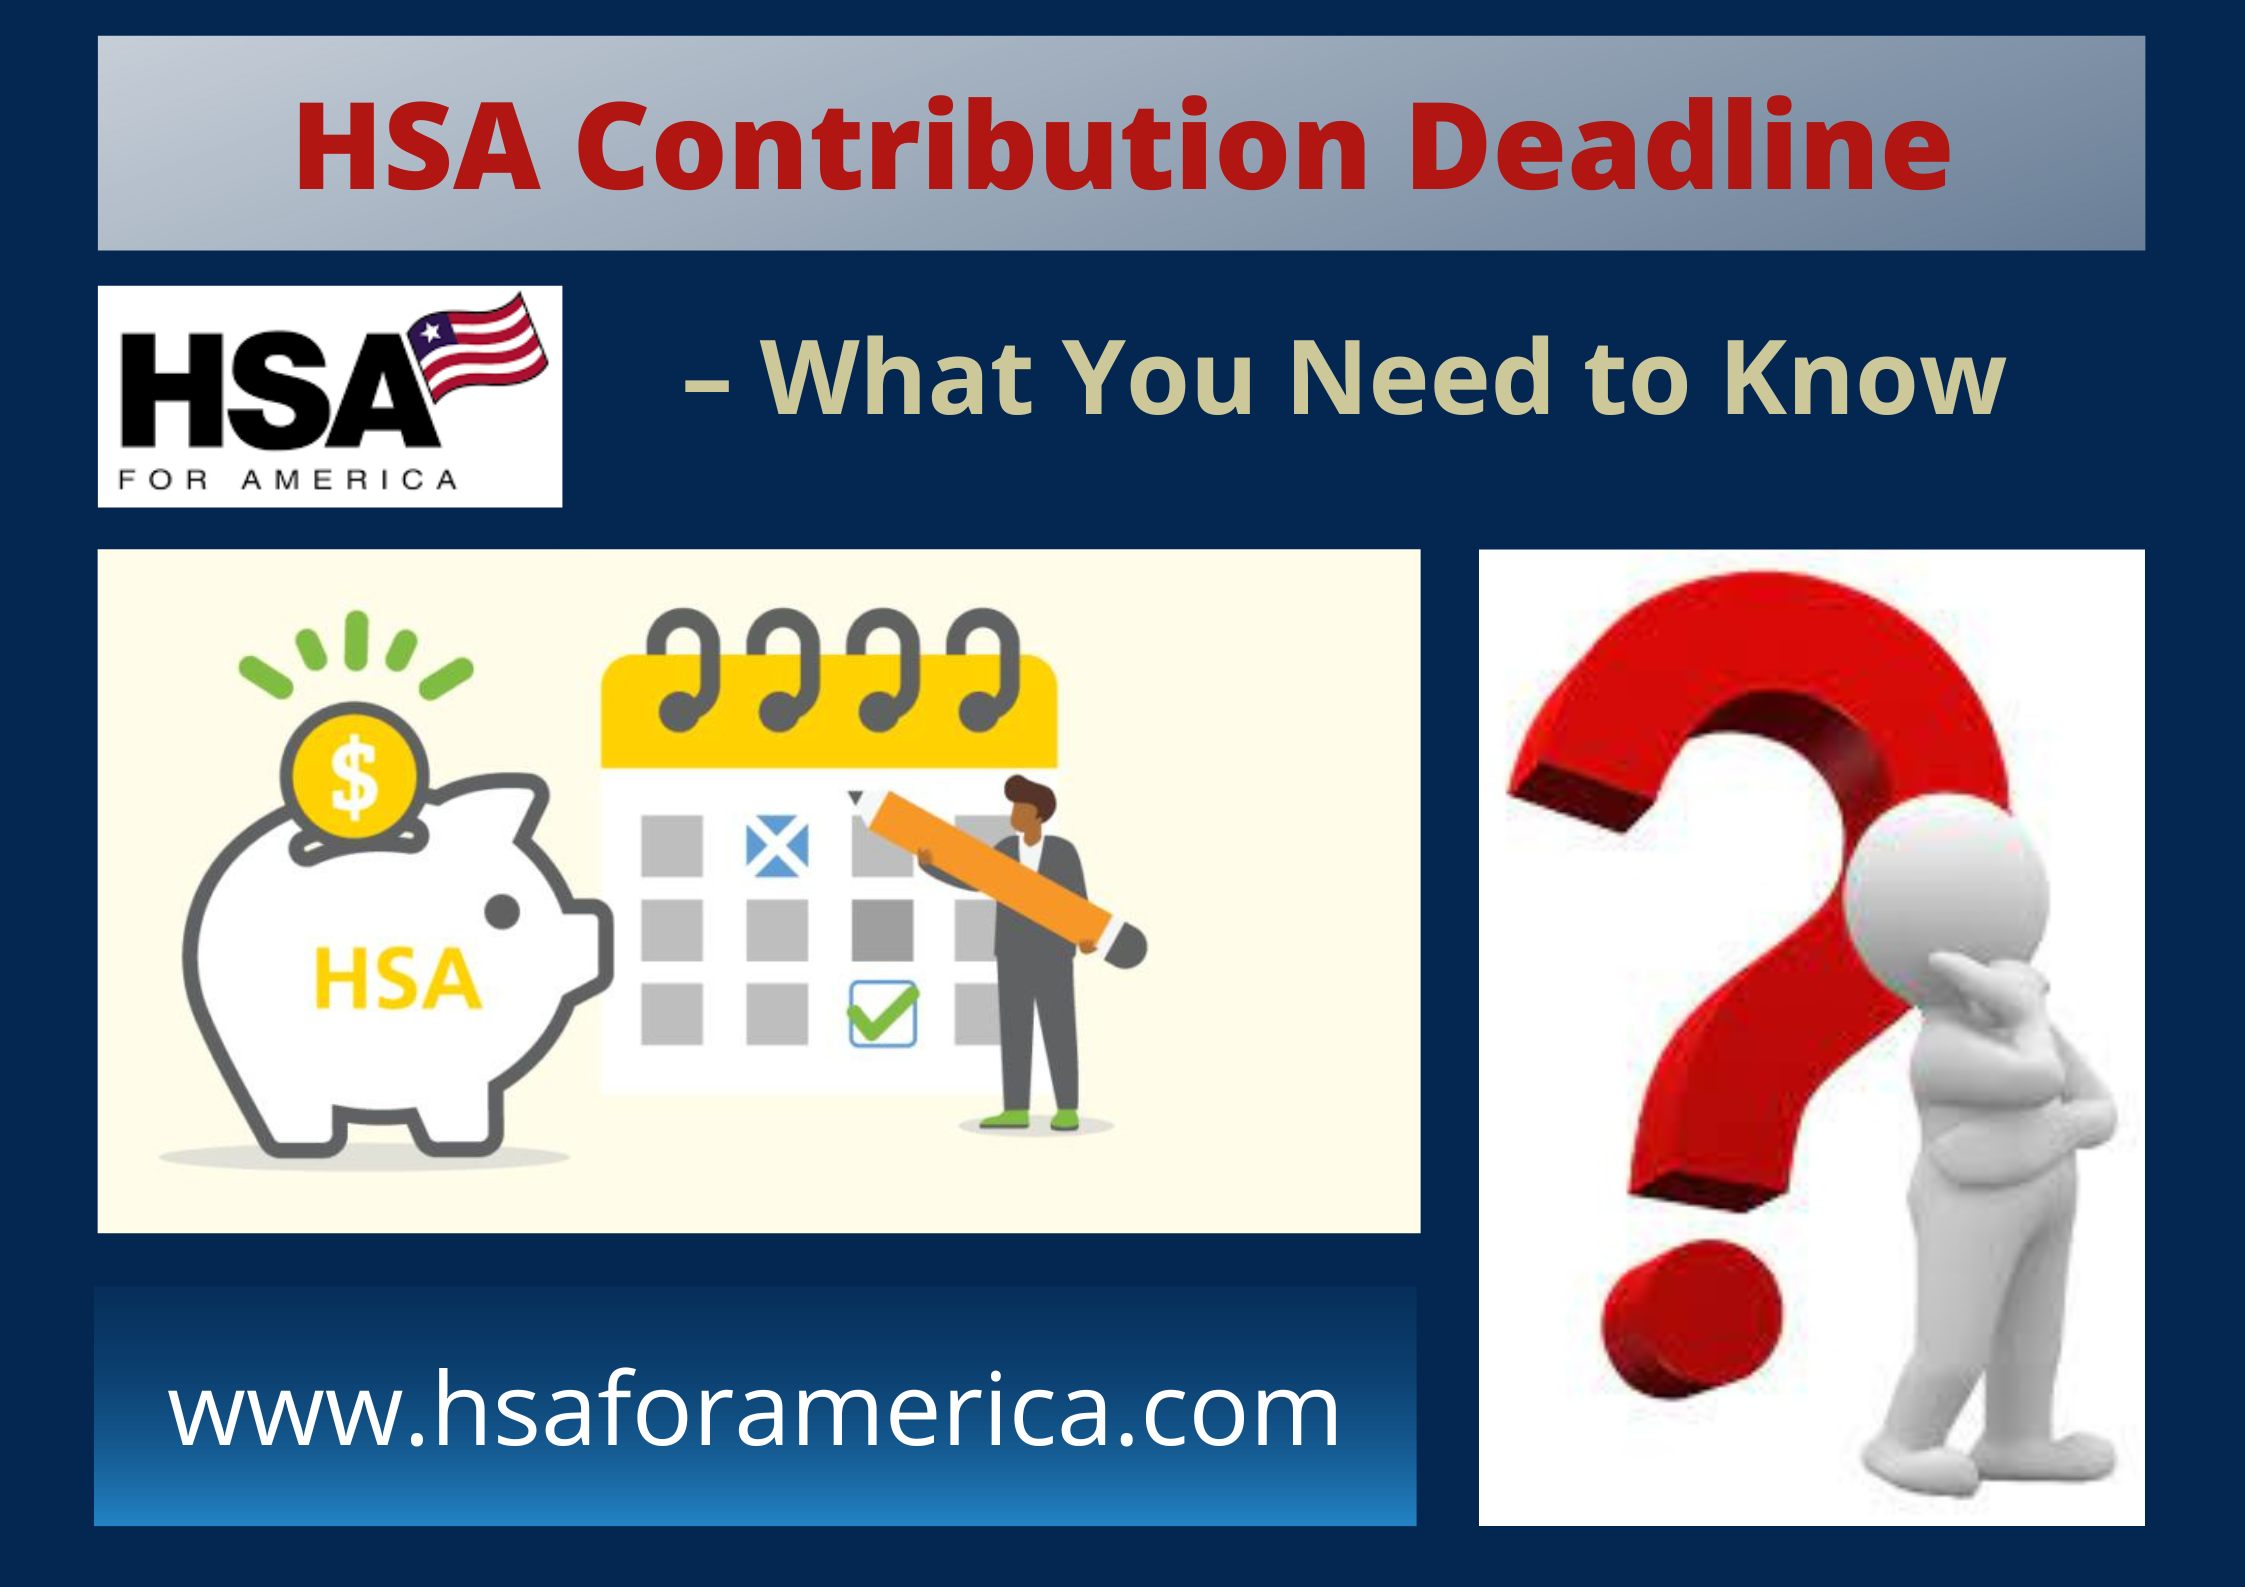 https://hsaforamerica.com/wp-content/uploads/2022/04/HSA-Contribution-Deadline-%E2%80%93-What-You-Need-to-Know.png